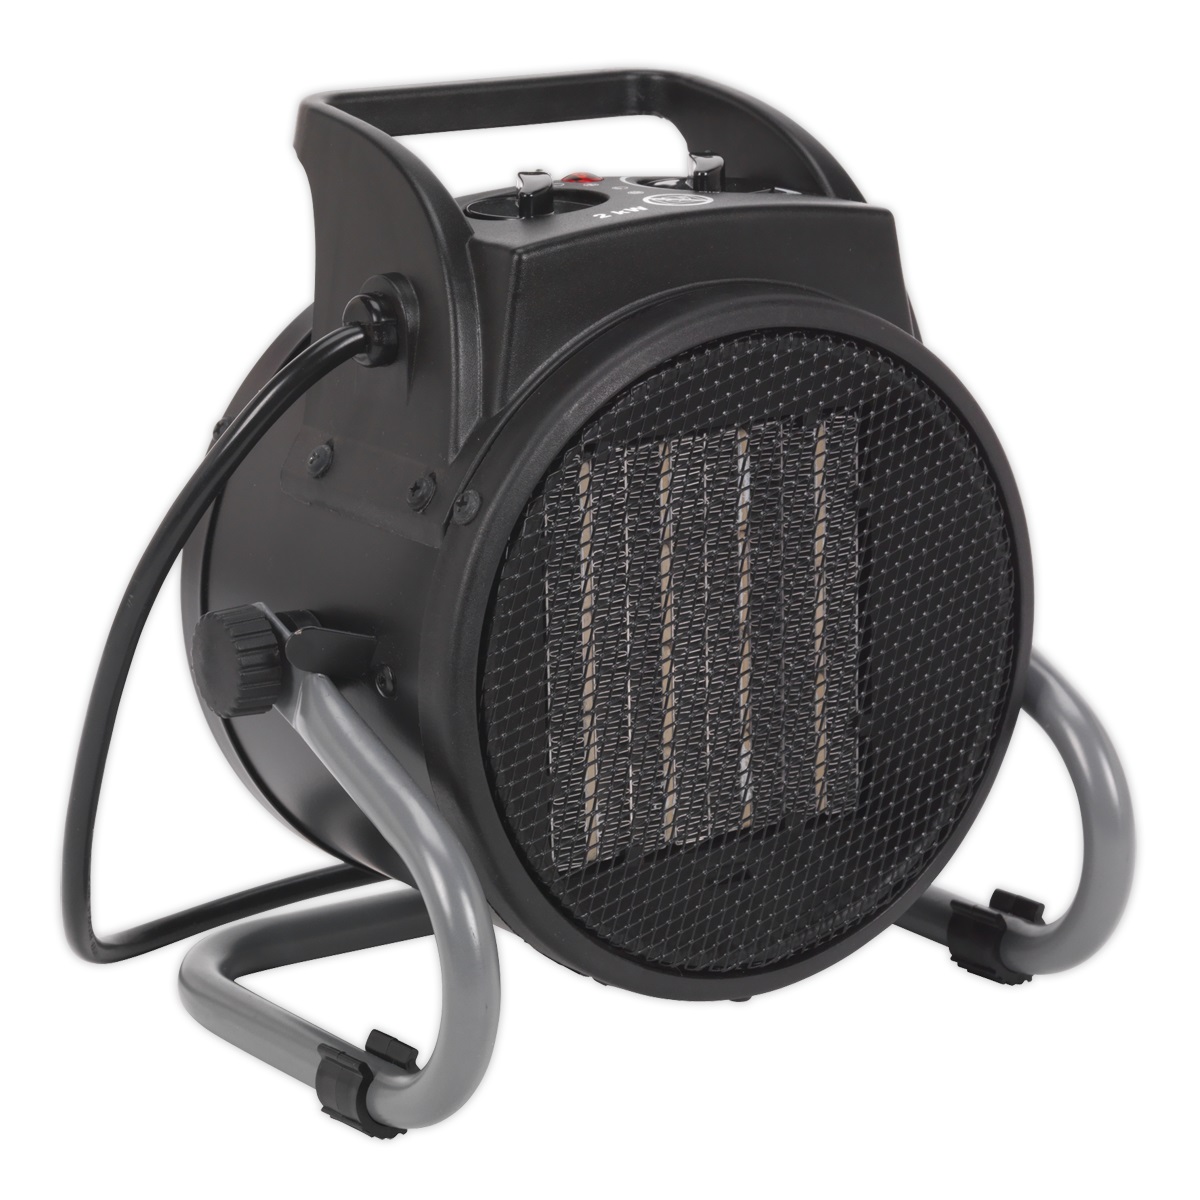 Sealey Industrial PTC Fan Heater 2000W/230V PEH2001 | Features PTC heat conducting ceramic elements to achieve an instant, odour-free heat. | toolforce.ie